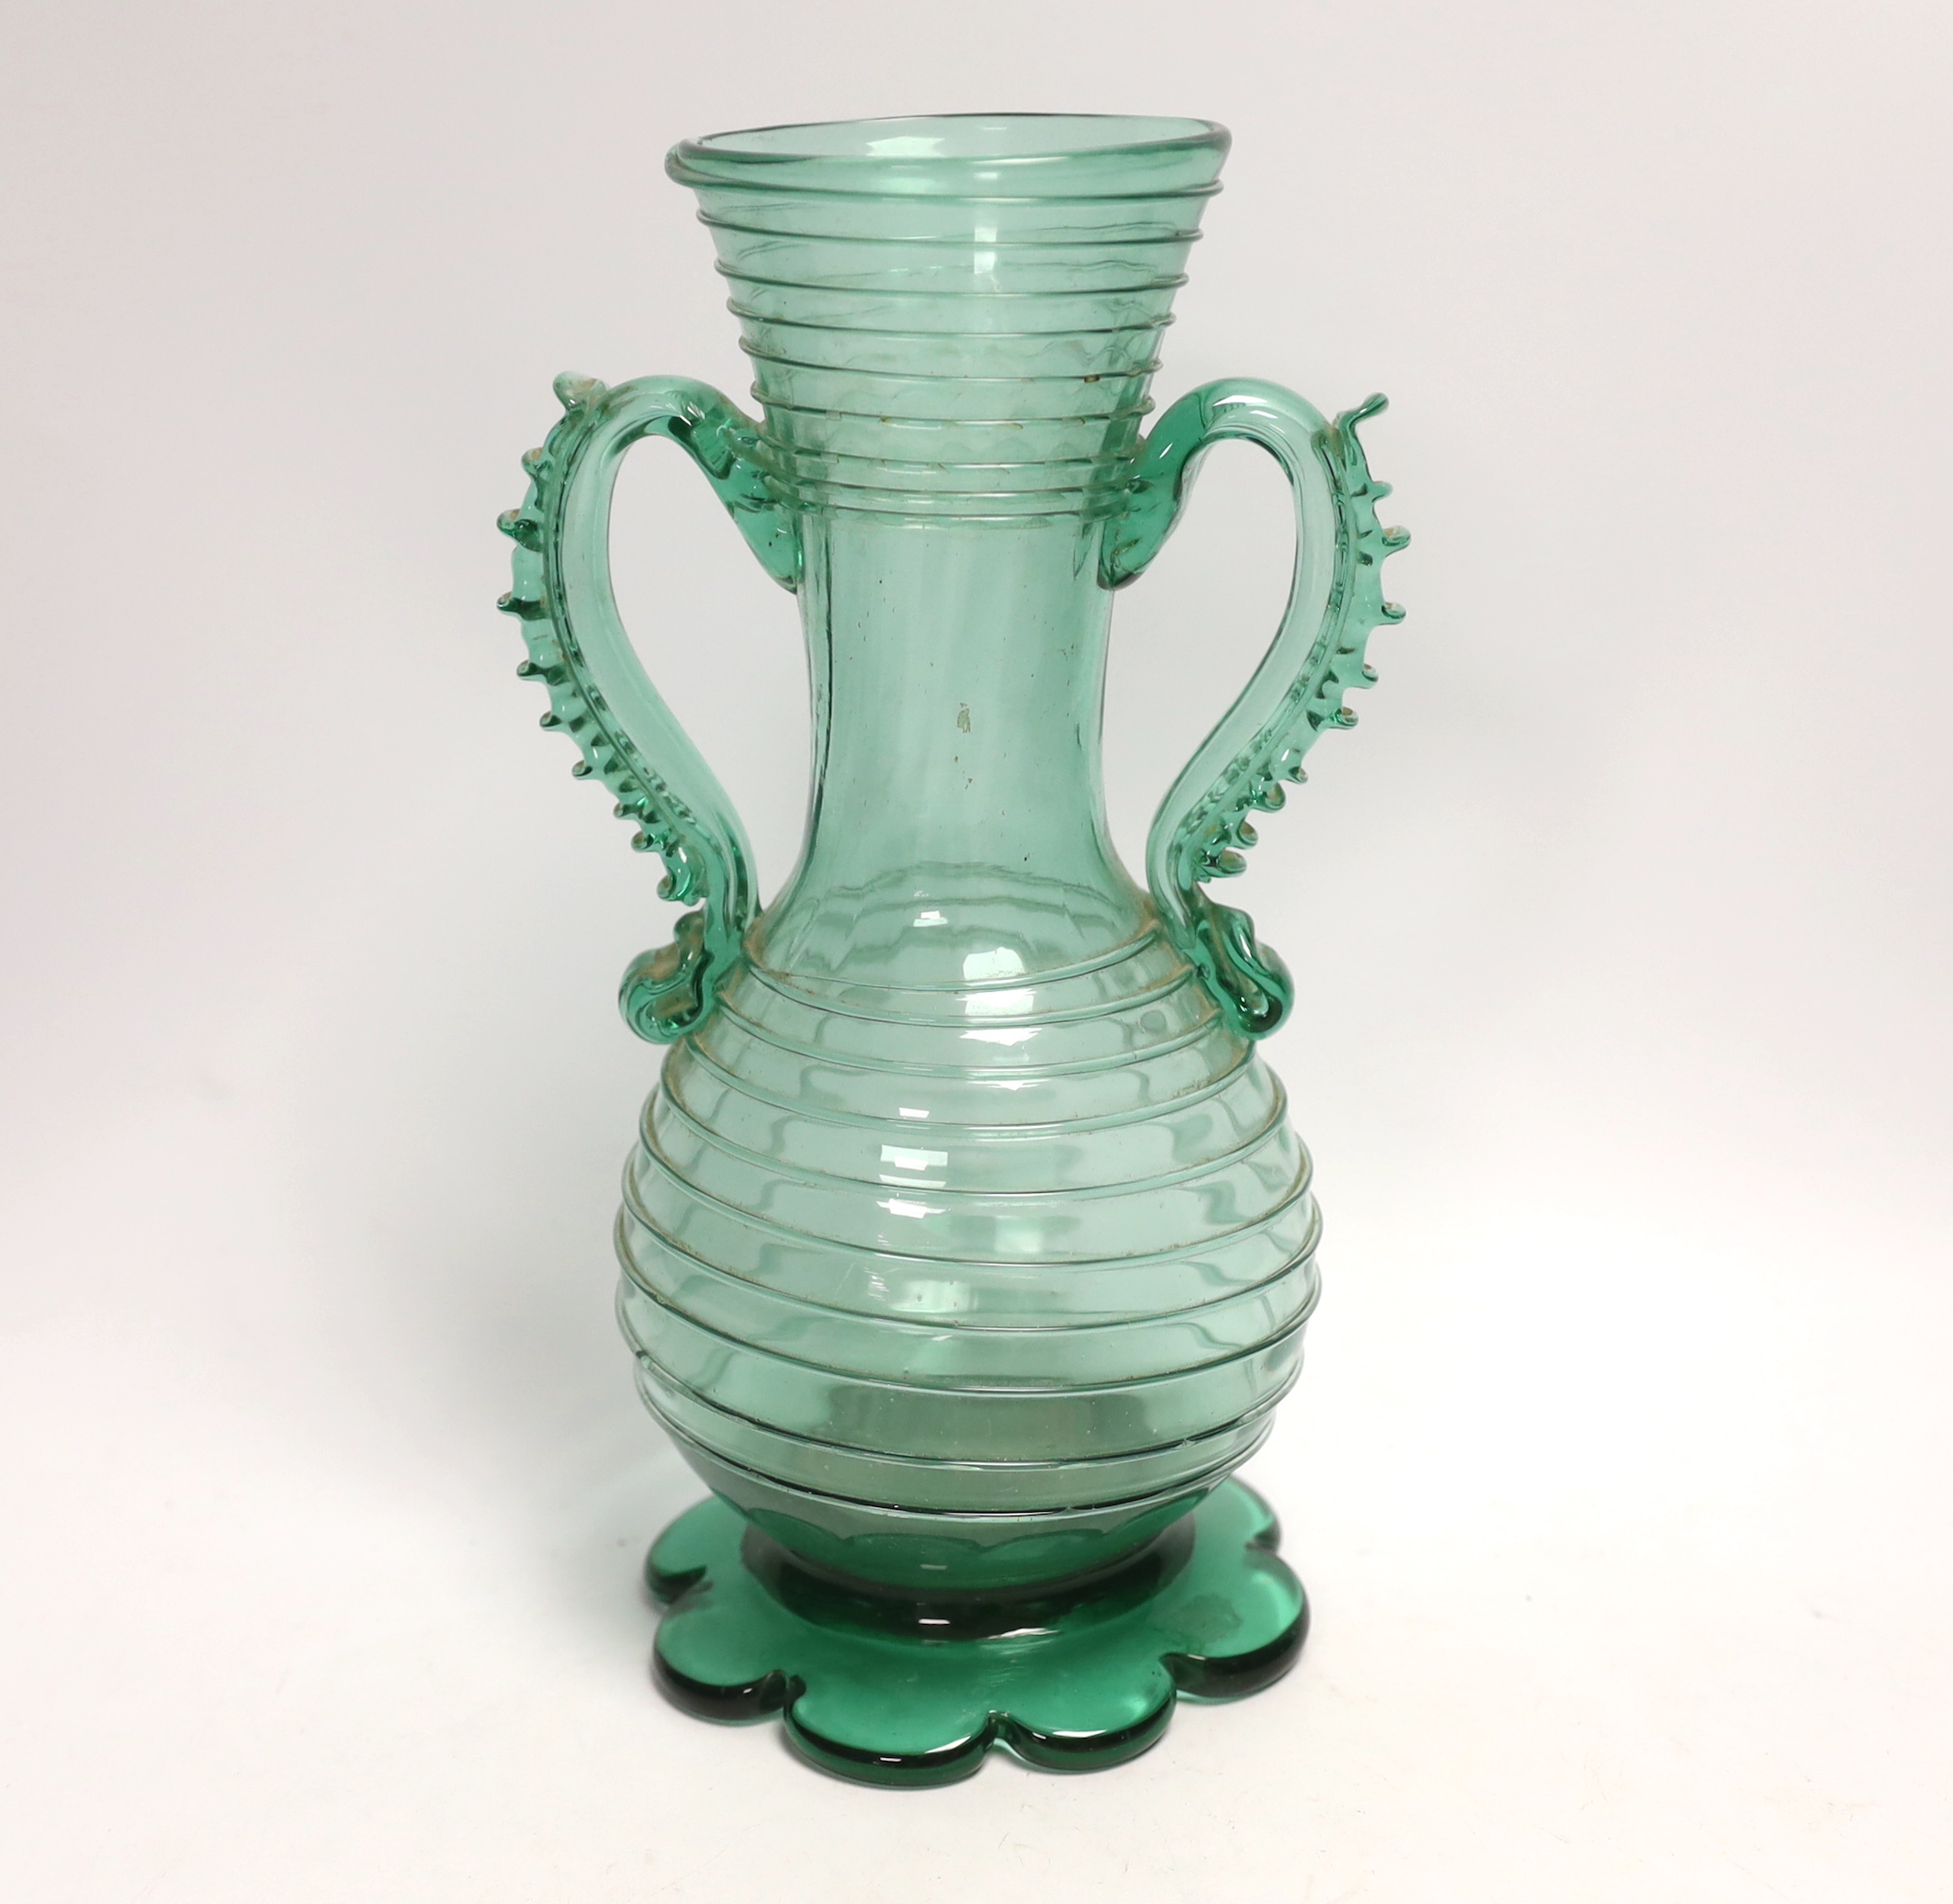 A hand blown green two handled Mallorcan glass vase, 20th century, 26.5cm high